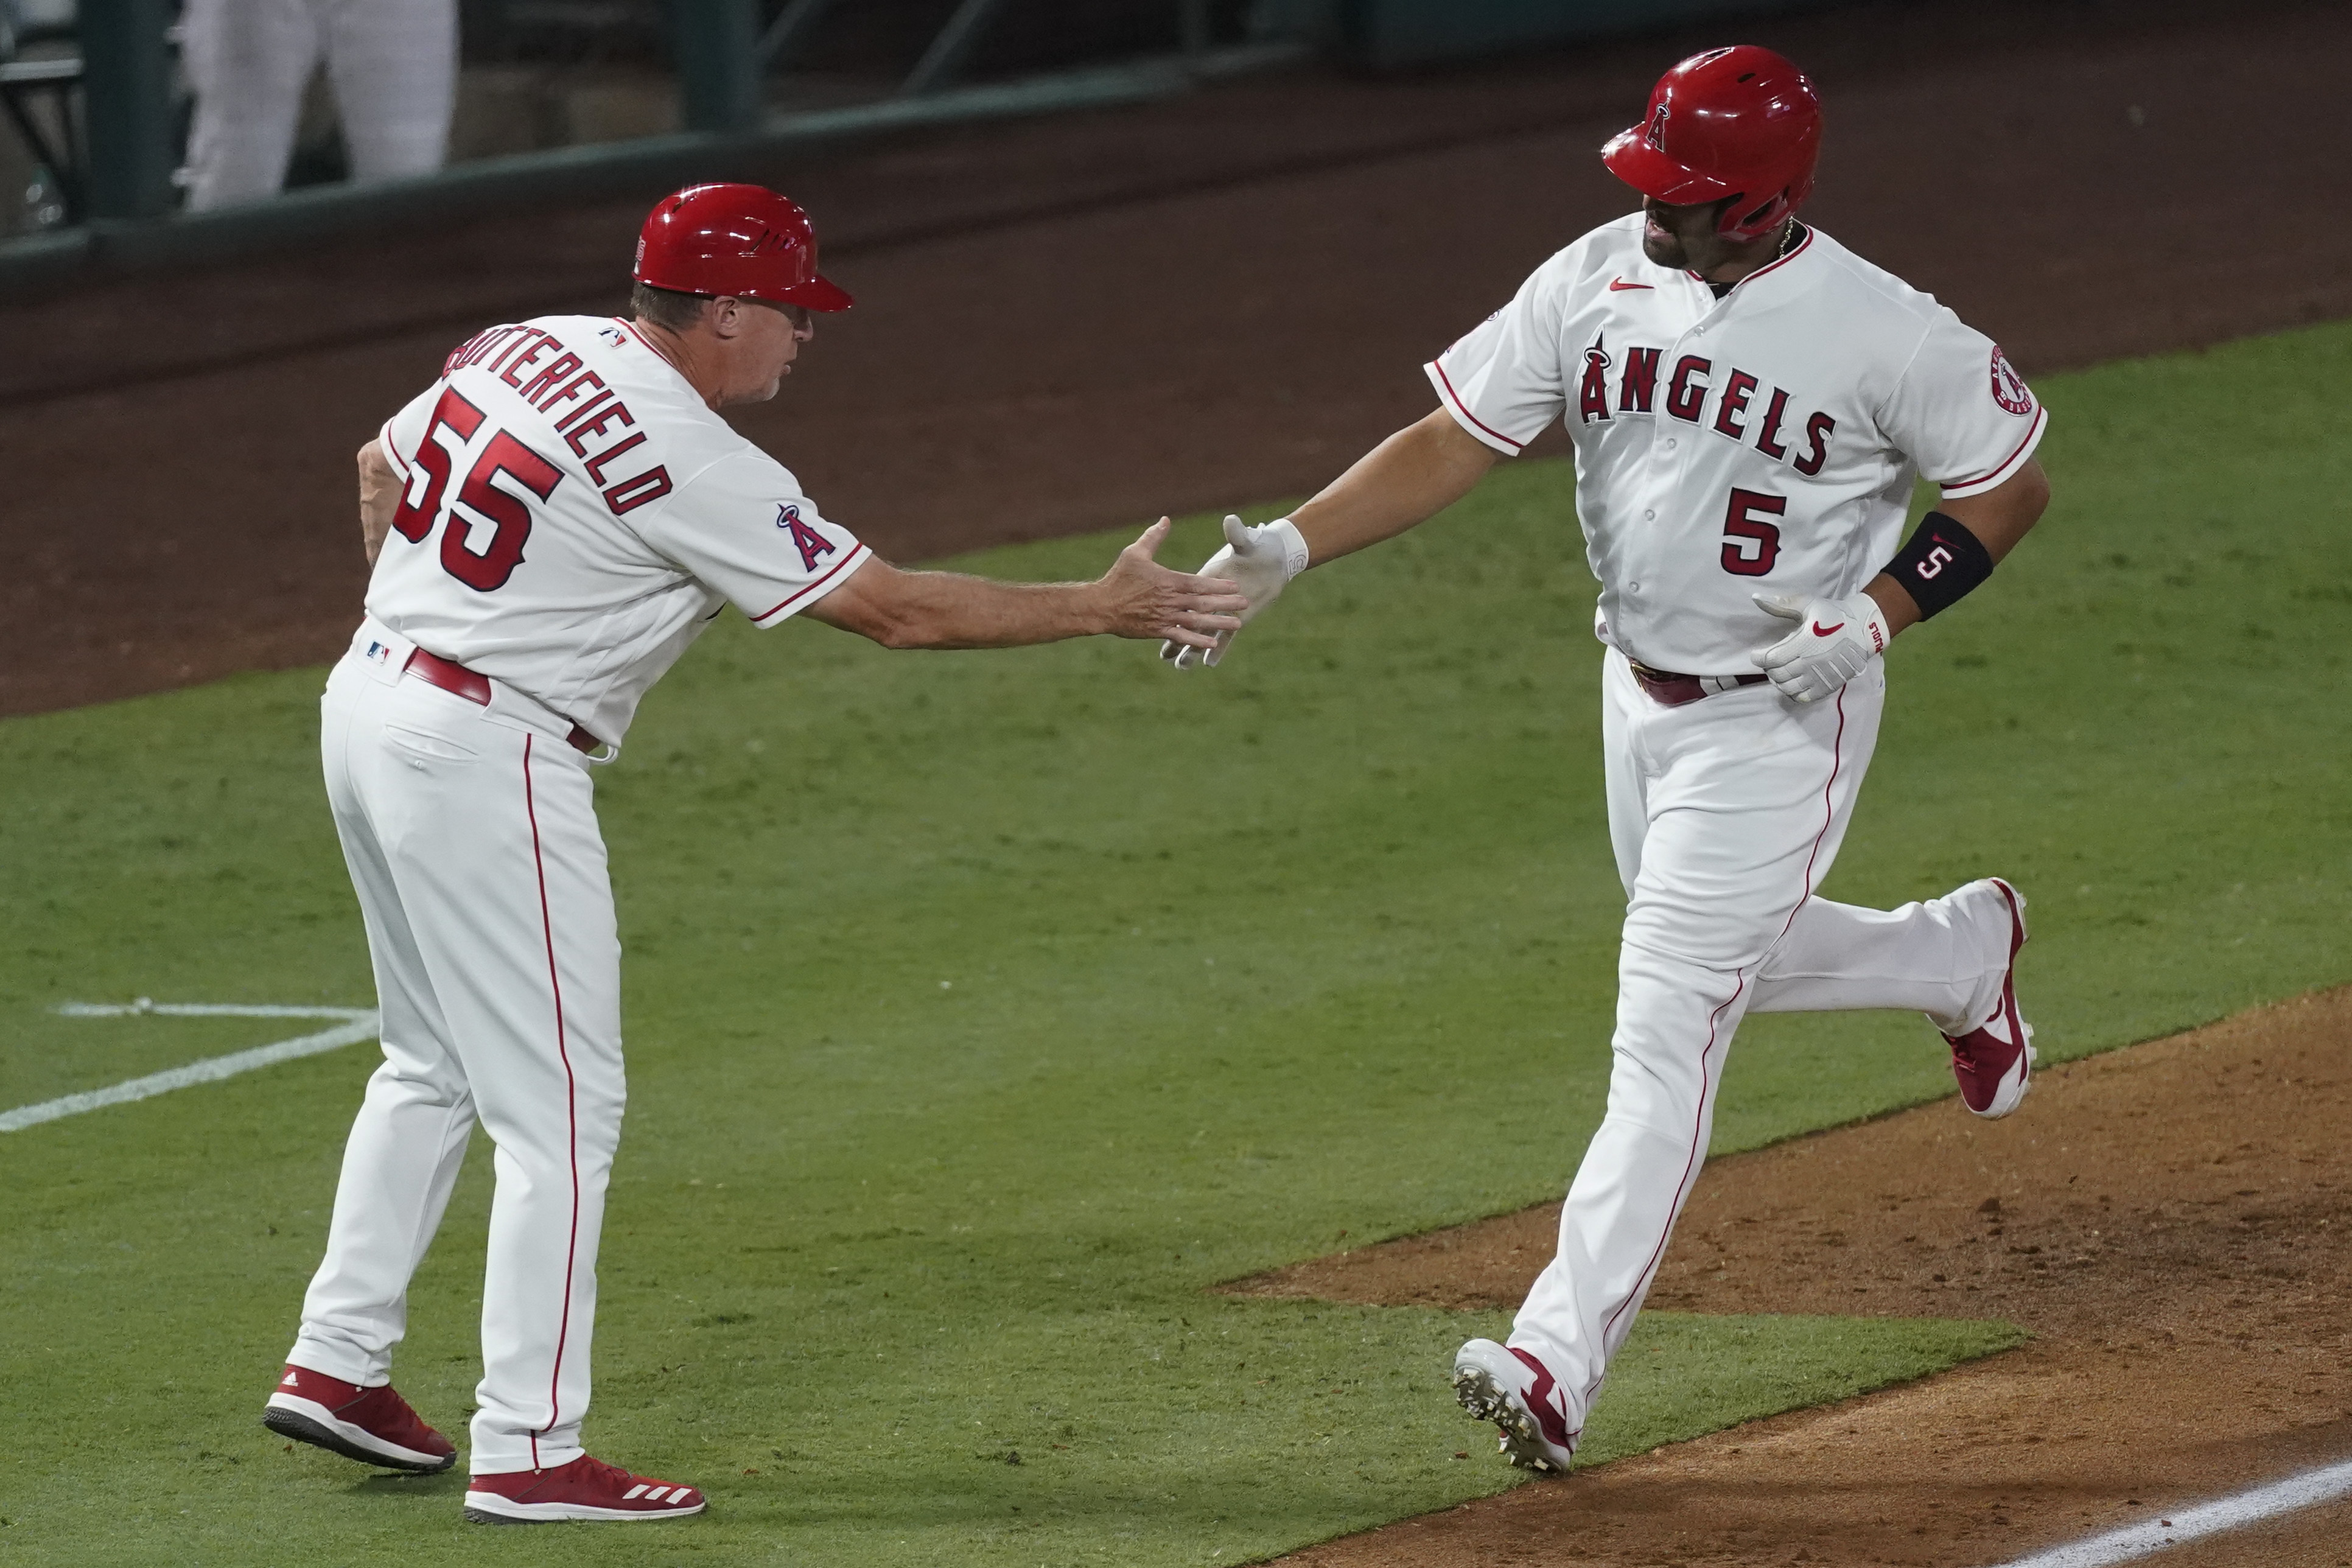 Andrelton Simmons, Shohei Ohtani both injured in Angels' loss